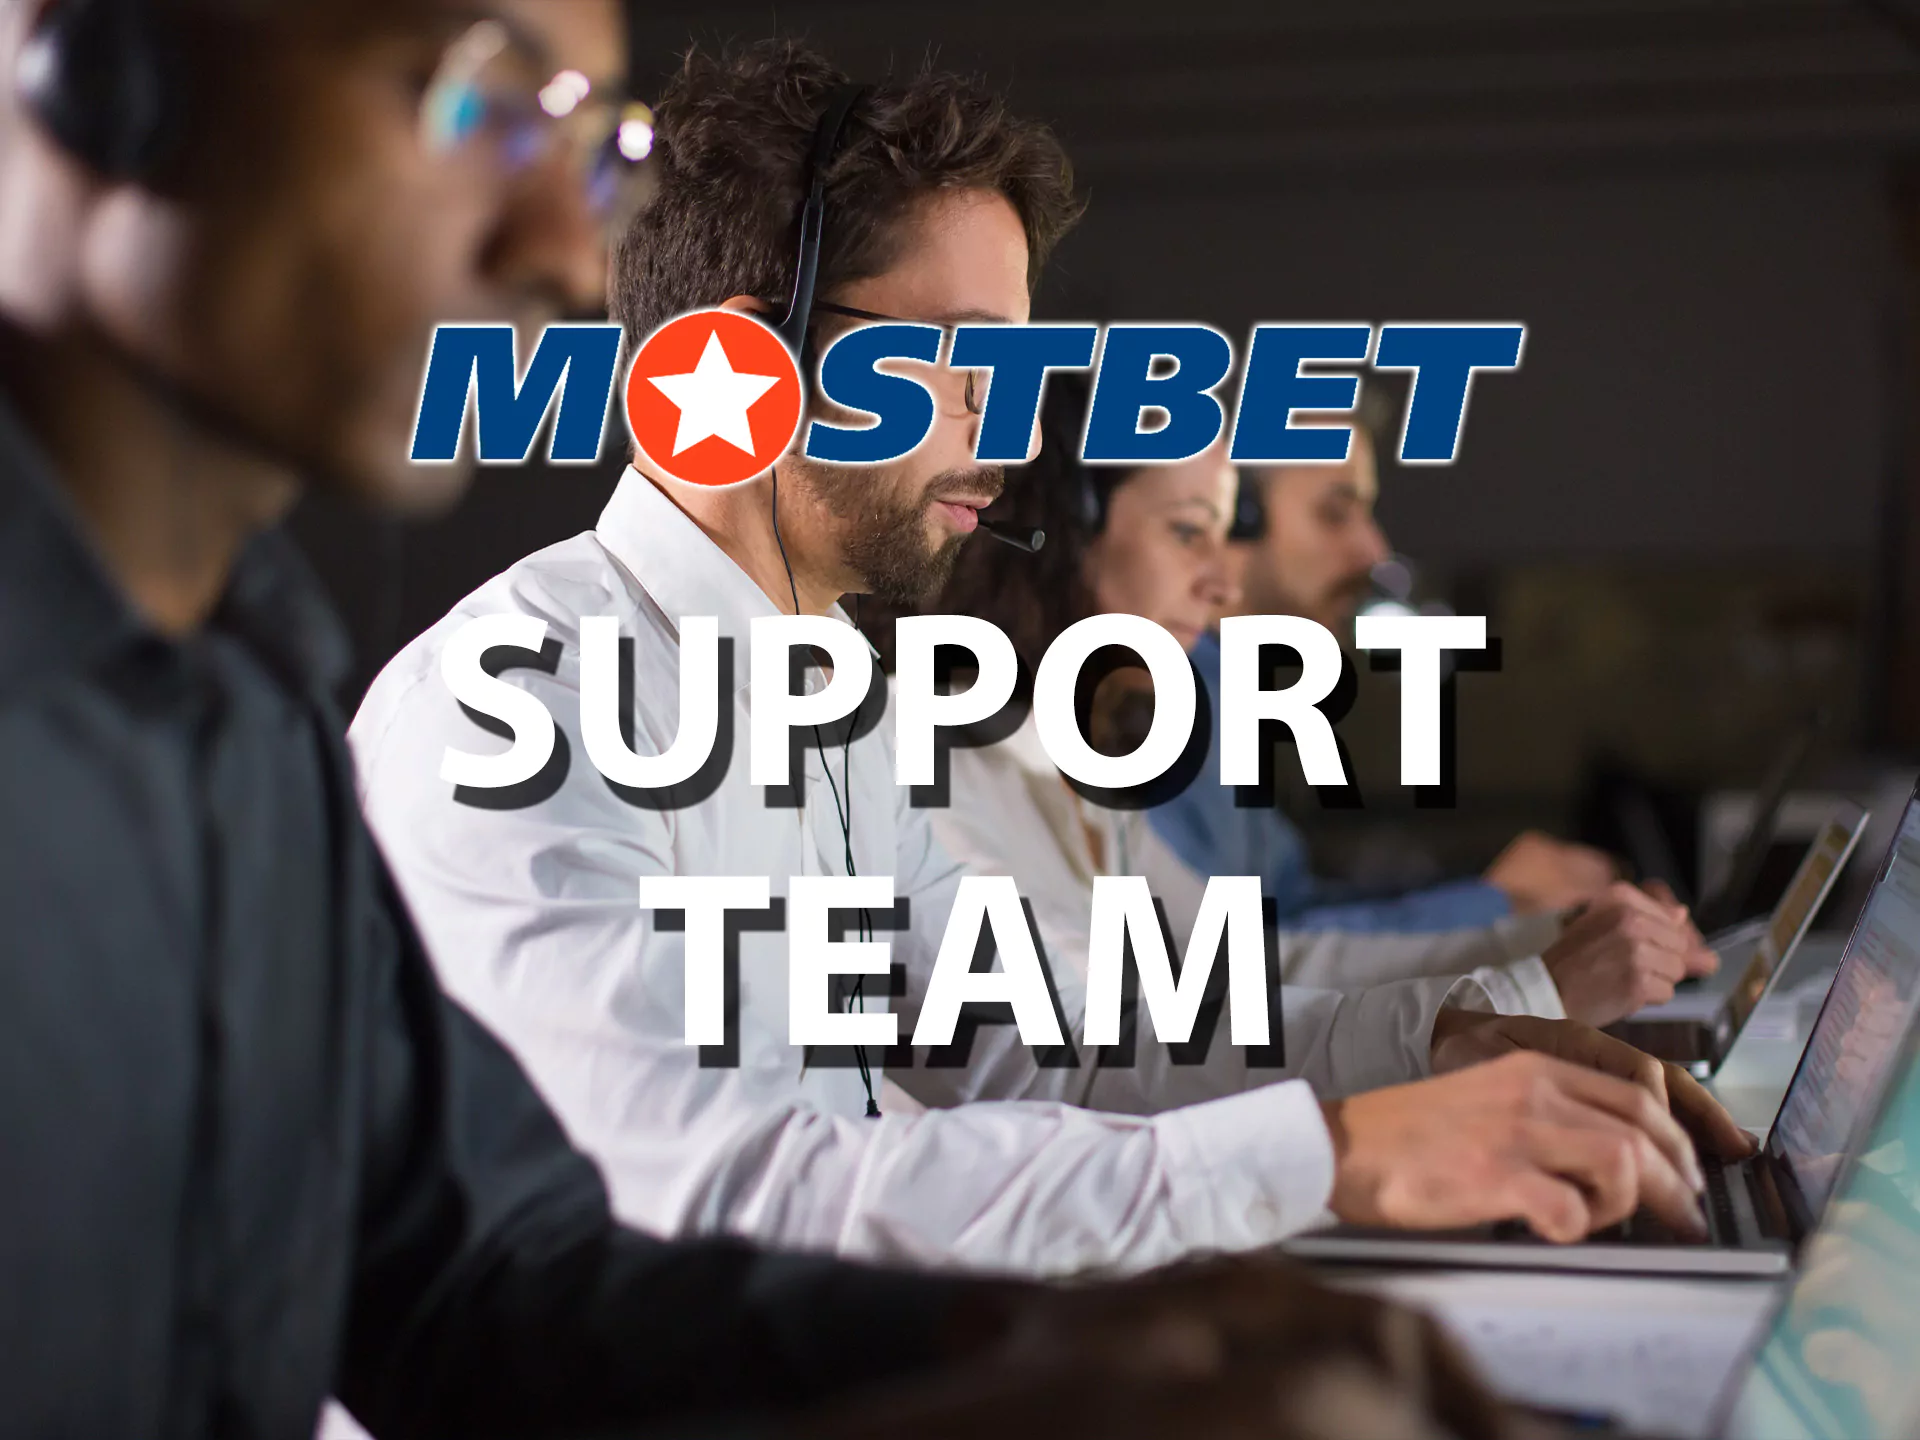 What Make Mostbet-27 Betting company and Casino in Turkey Don't Want You To Know